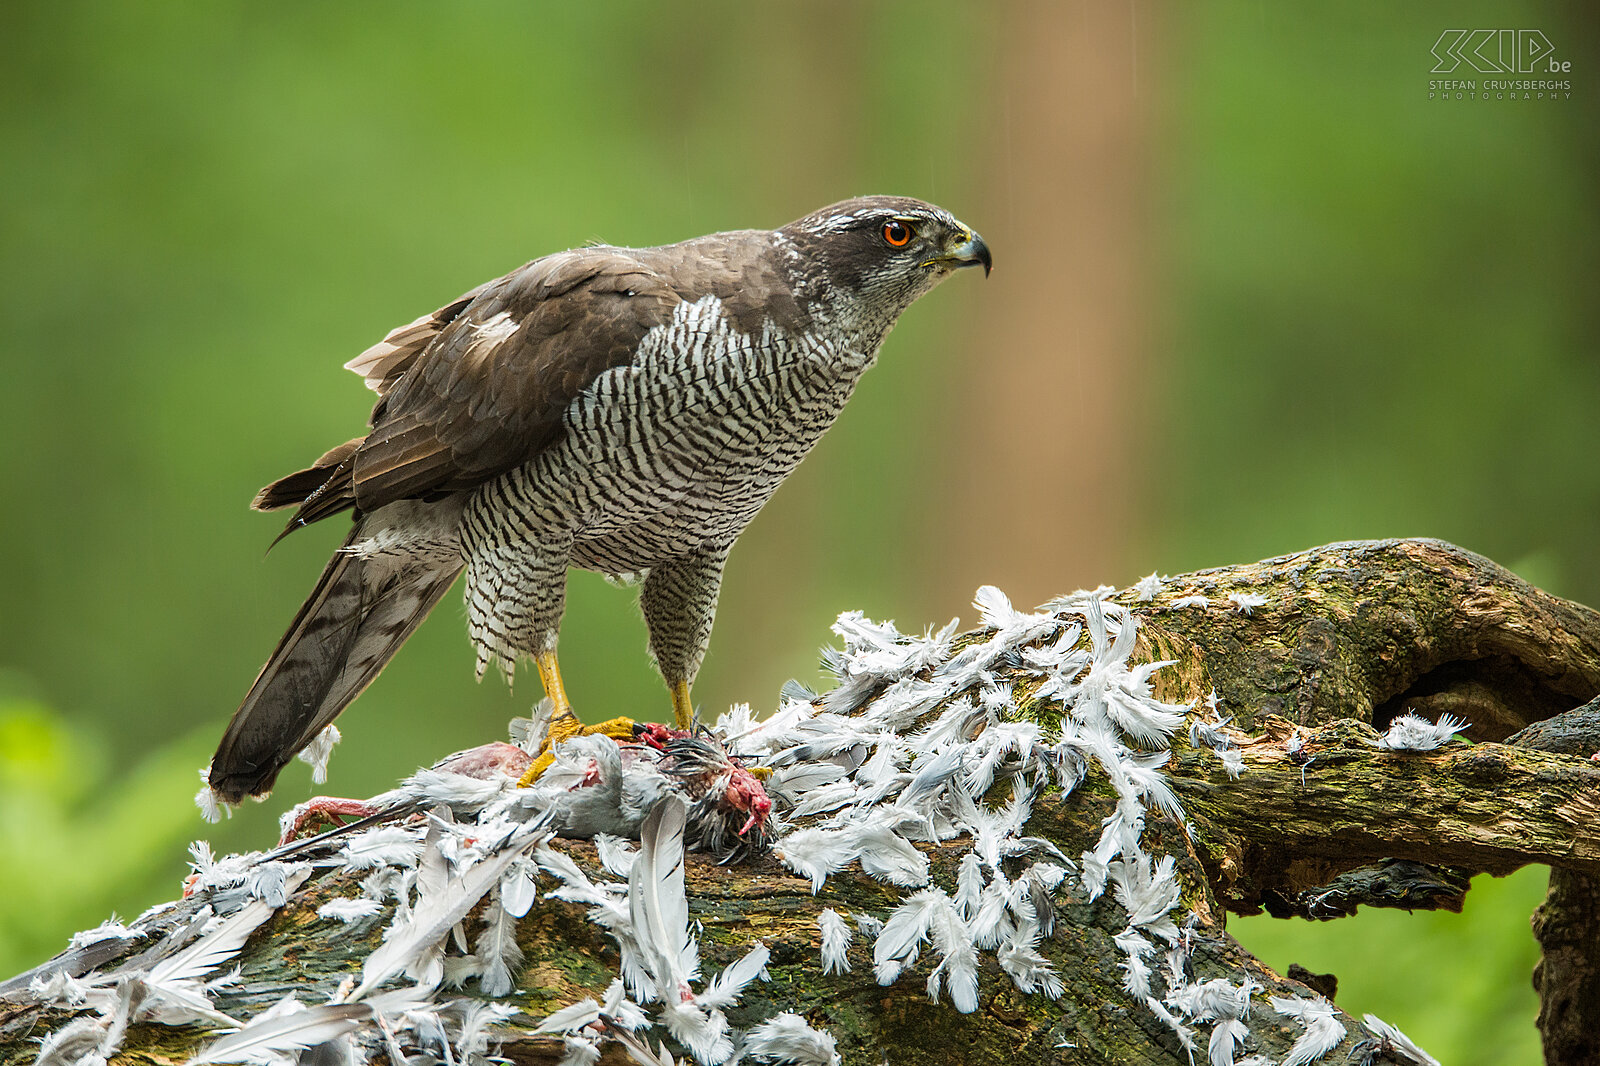 Birds of prey - Northern goshawk with pigeon The Northern goshawk (Accipiter gentilis) is mainly found in forest areas and usually hunts from a branch in a tree. Their main preys are pigeons, jays, crows and rabbits.  Stefan Cruysberghs